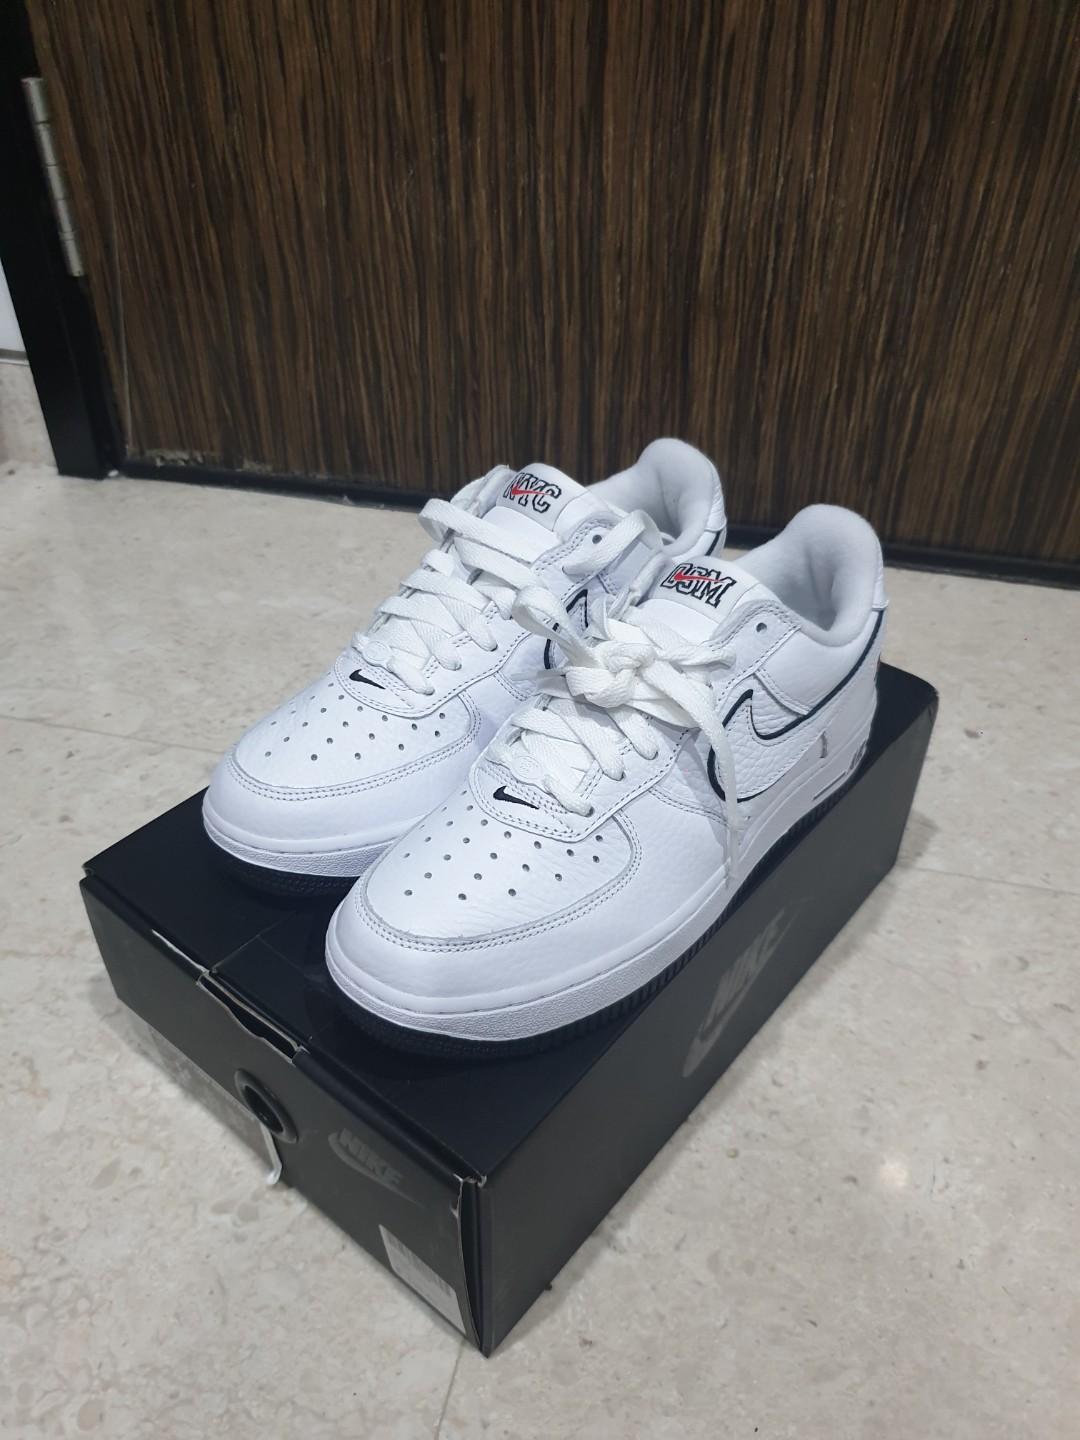 size 6.5 air force 1